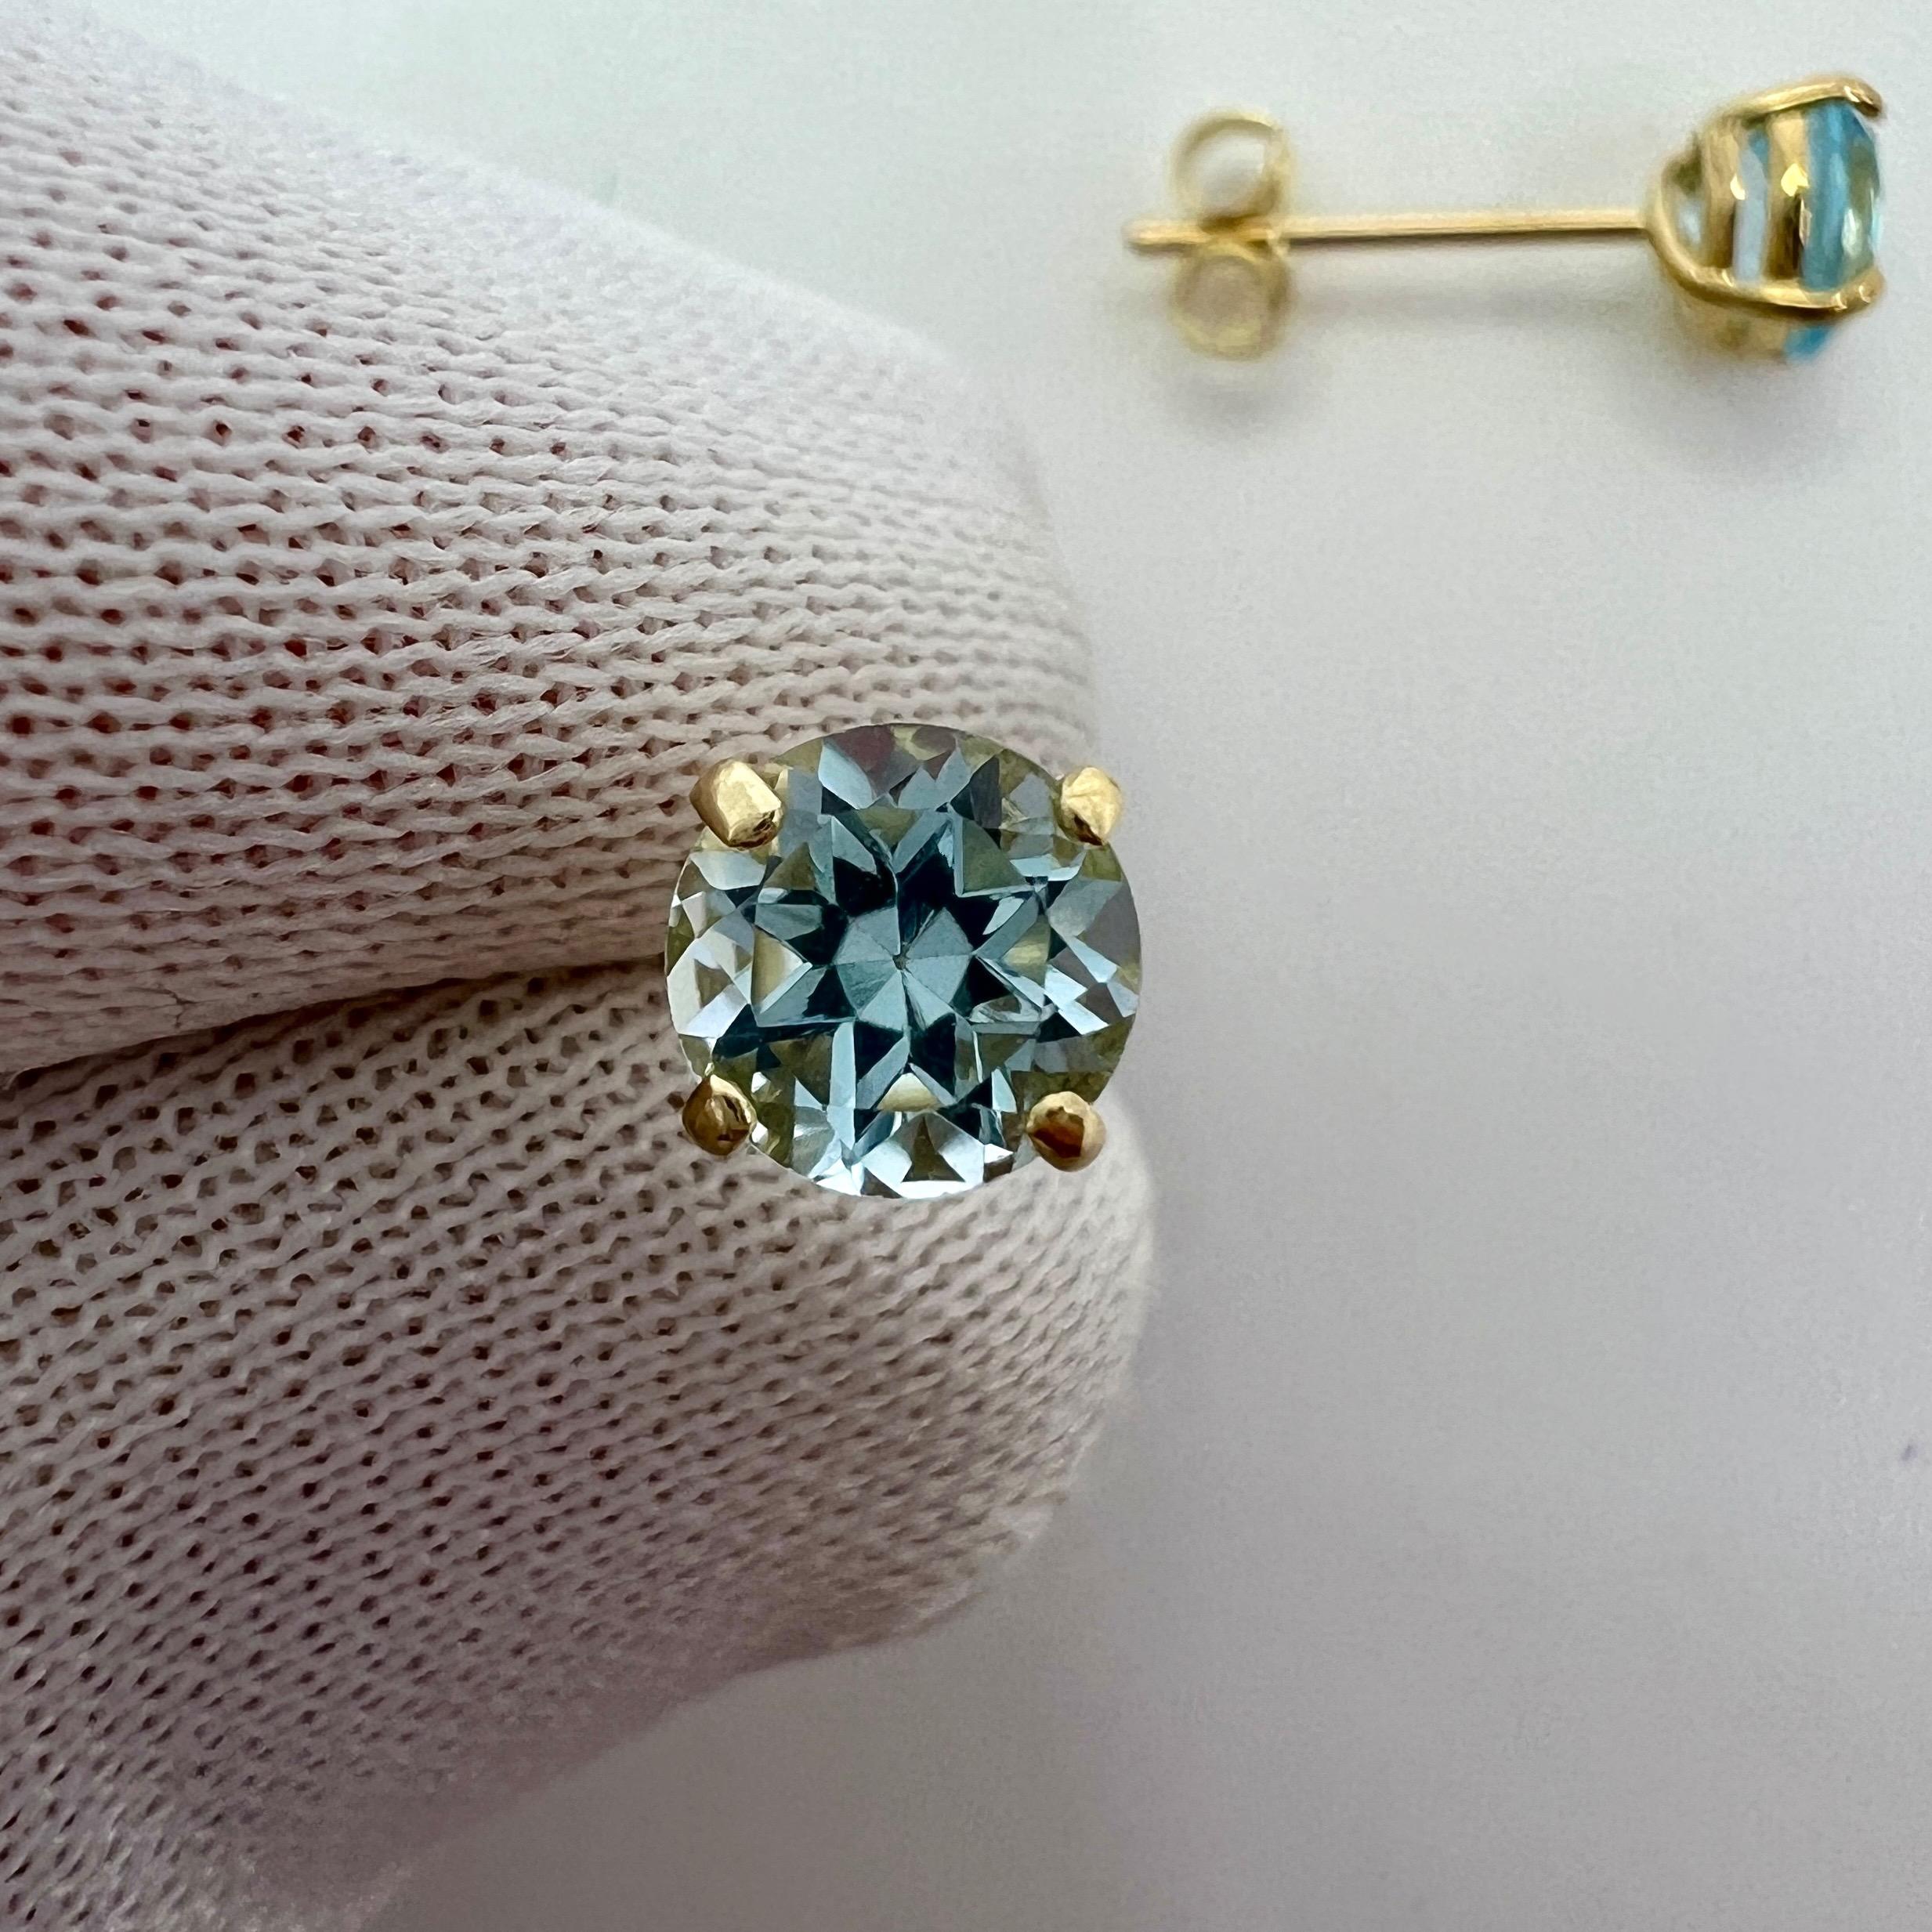 Natural Bright Blue Topaz 9k Yellow Gold Earring Studs.

Beautiful 5mm matching pair of round topaz with bright blue colour, excellent clarity and an excellent round brilliant cut.

Set in lightweight 9k yellow gold studs with butterfly